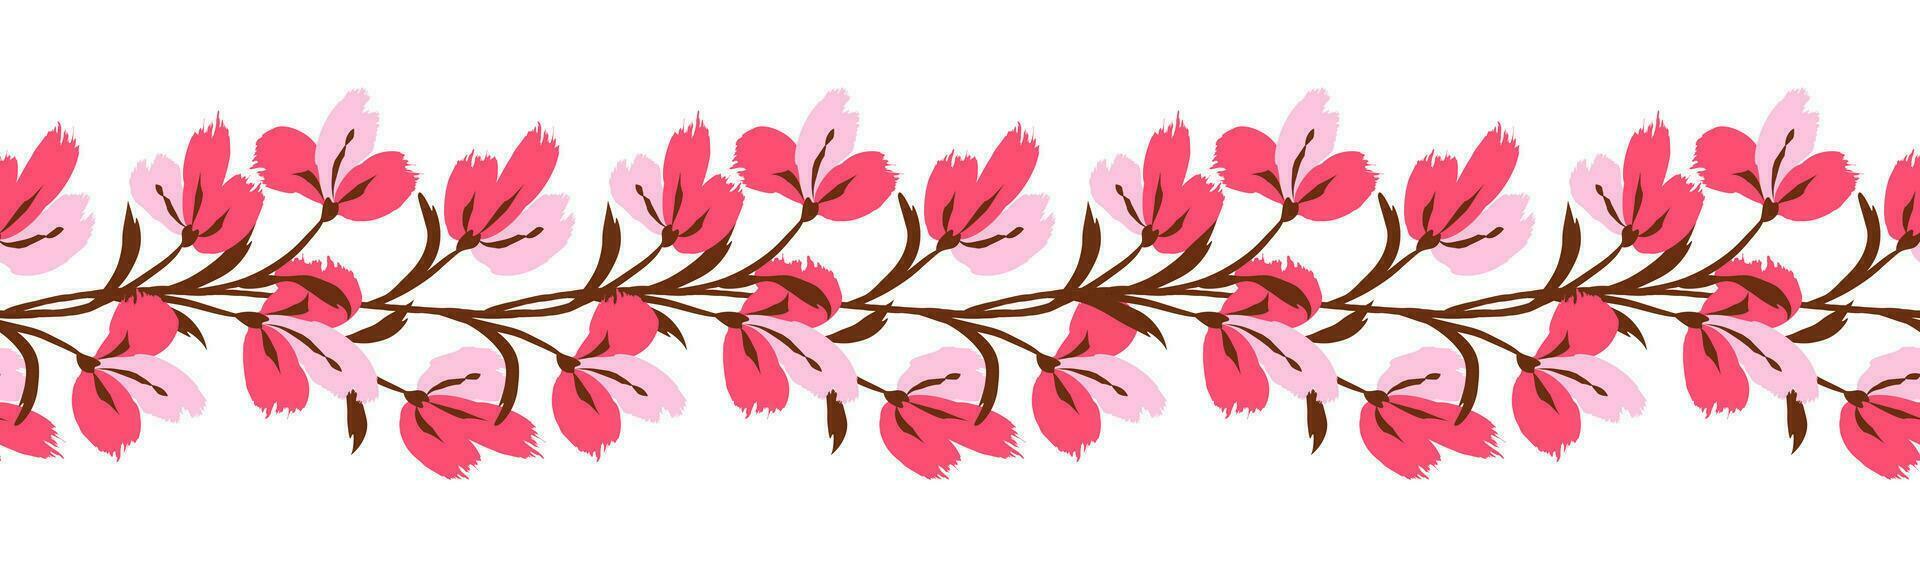 Floral seamless border. Background with bouquet flower branch brush strokes. Border frame made of flowers. Seamless pattern vector